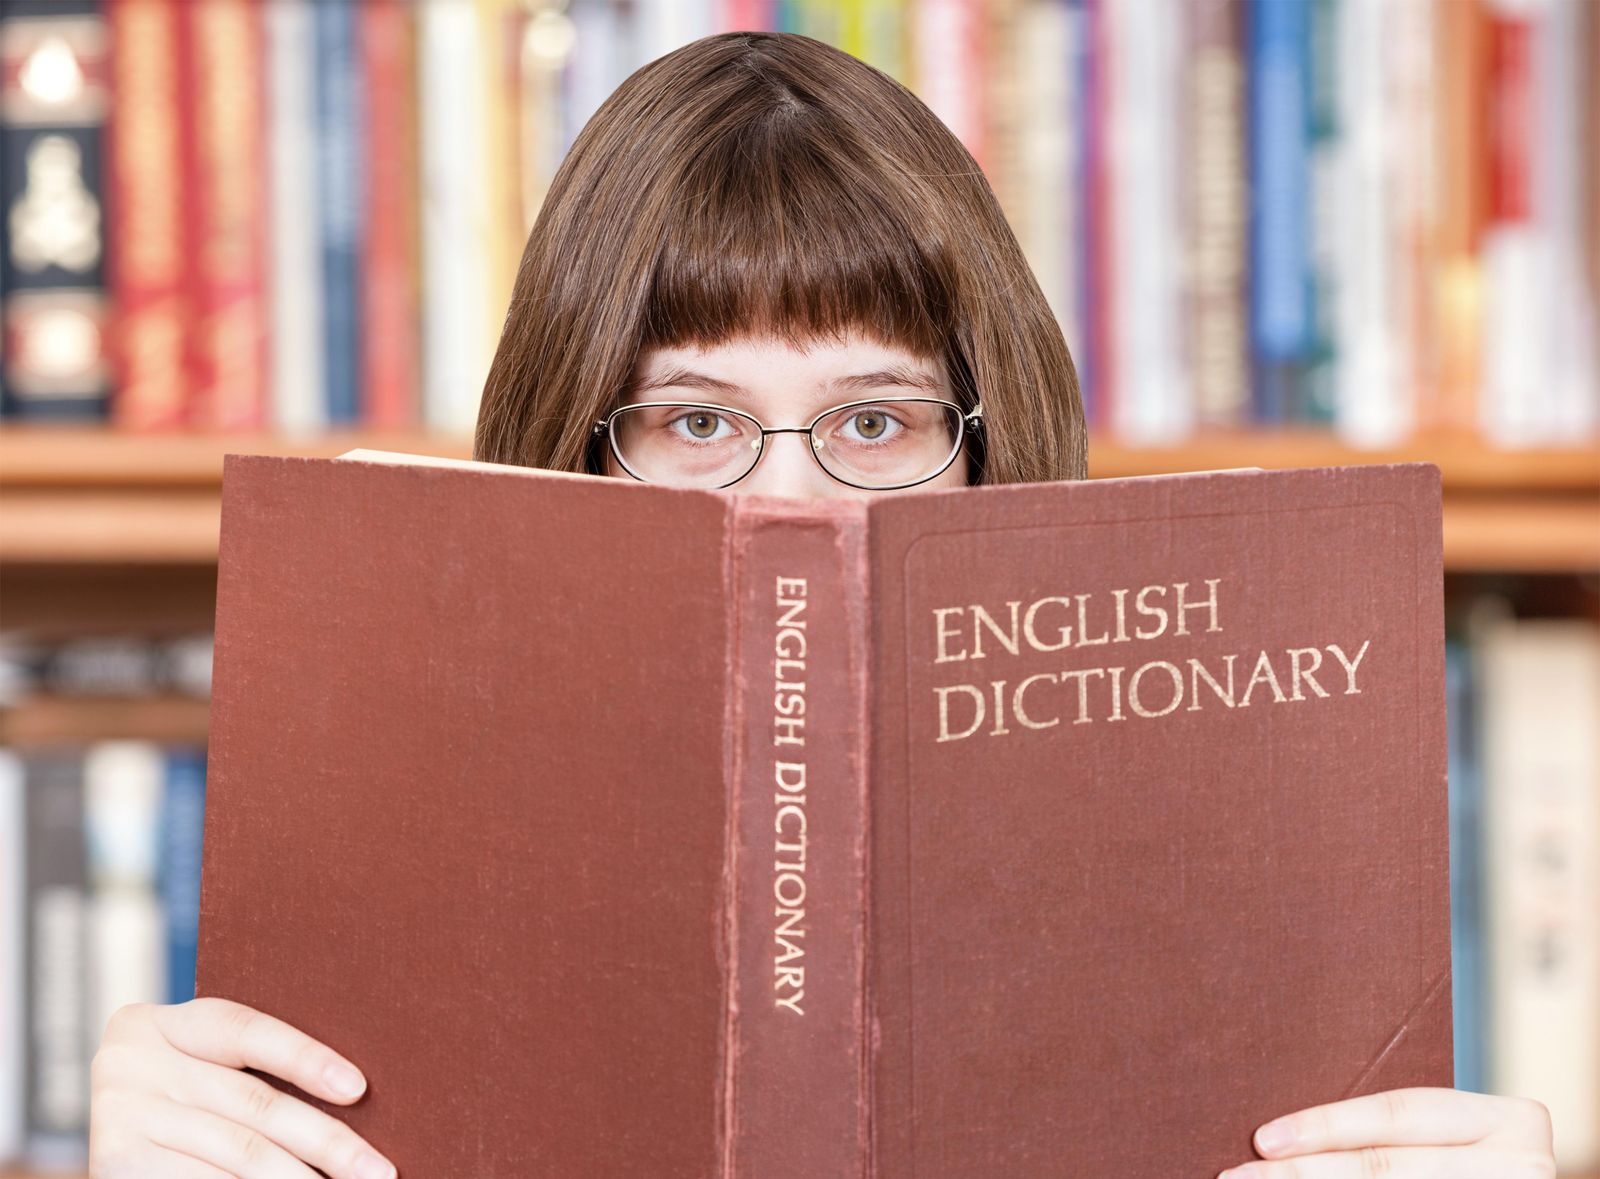 As “Dord” Shows, Being in the Dictionary Doesn't Always Mean